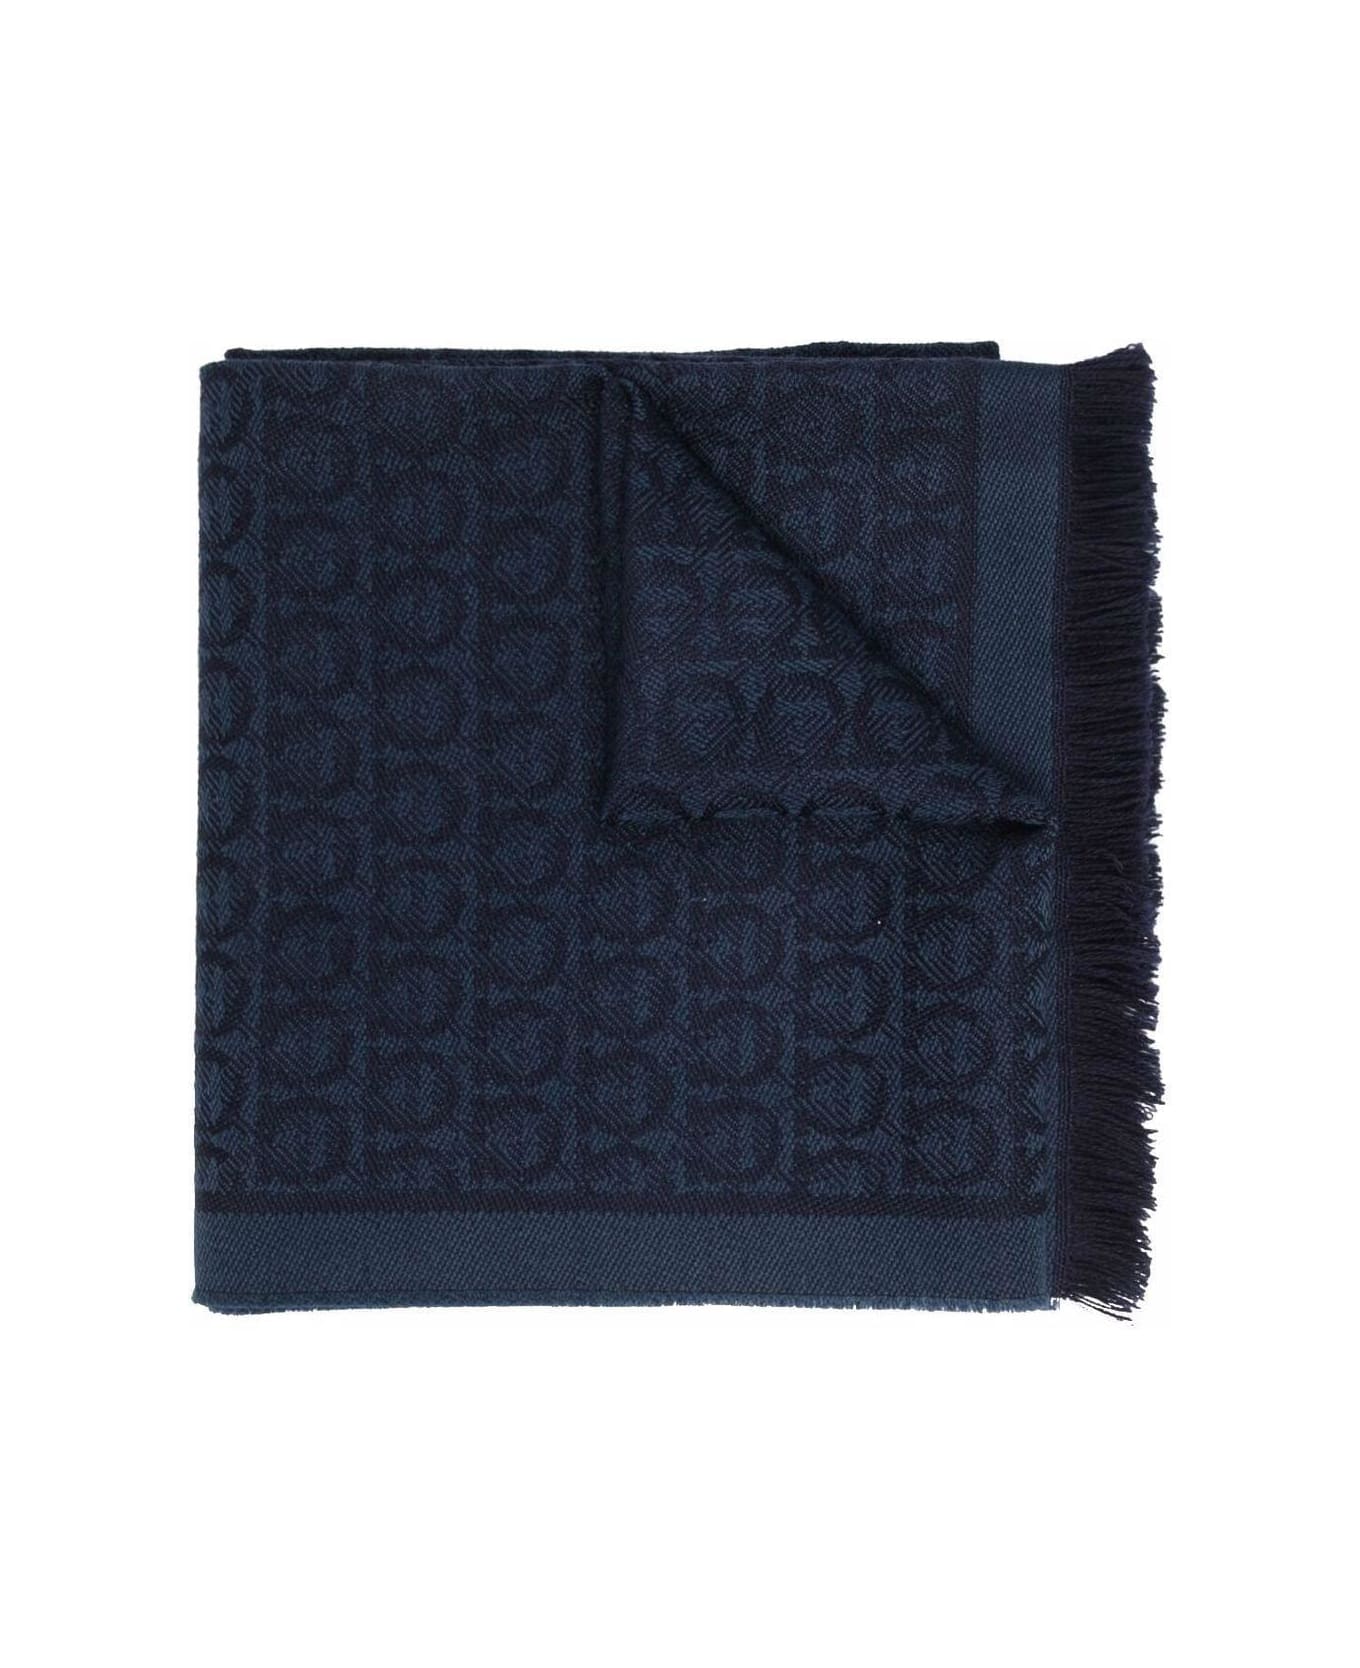 Ferragamo All-over Patterned Fringed Edge Scarf - Blue